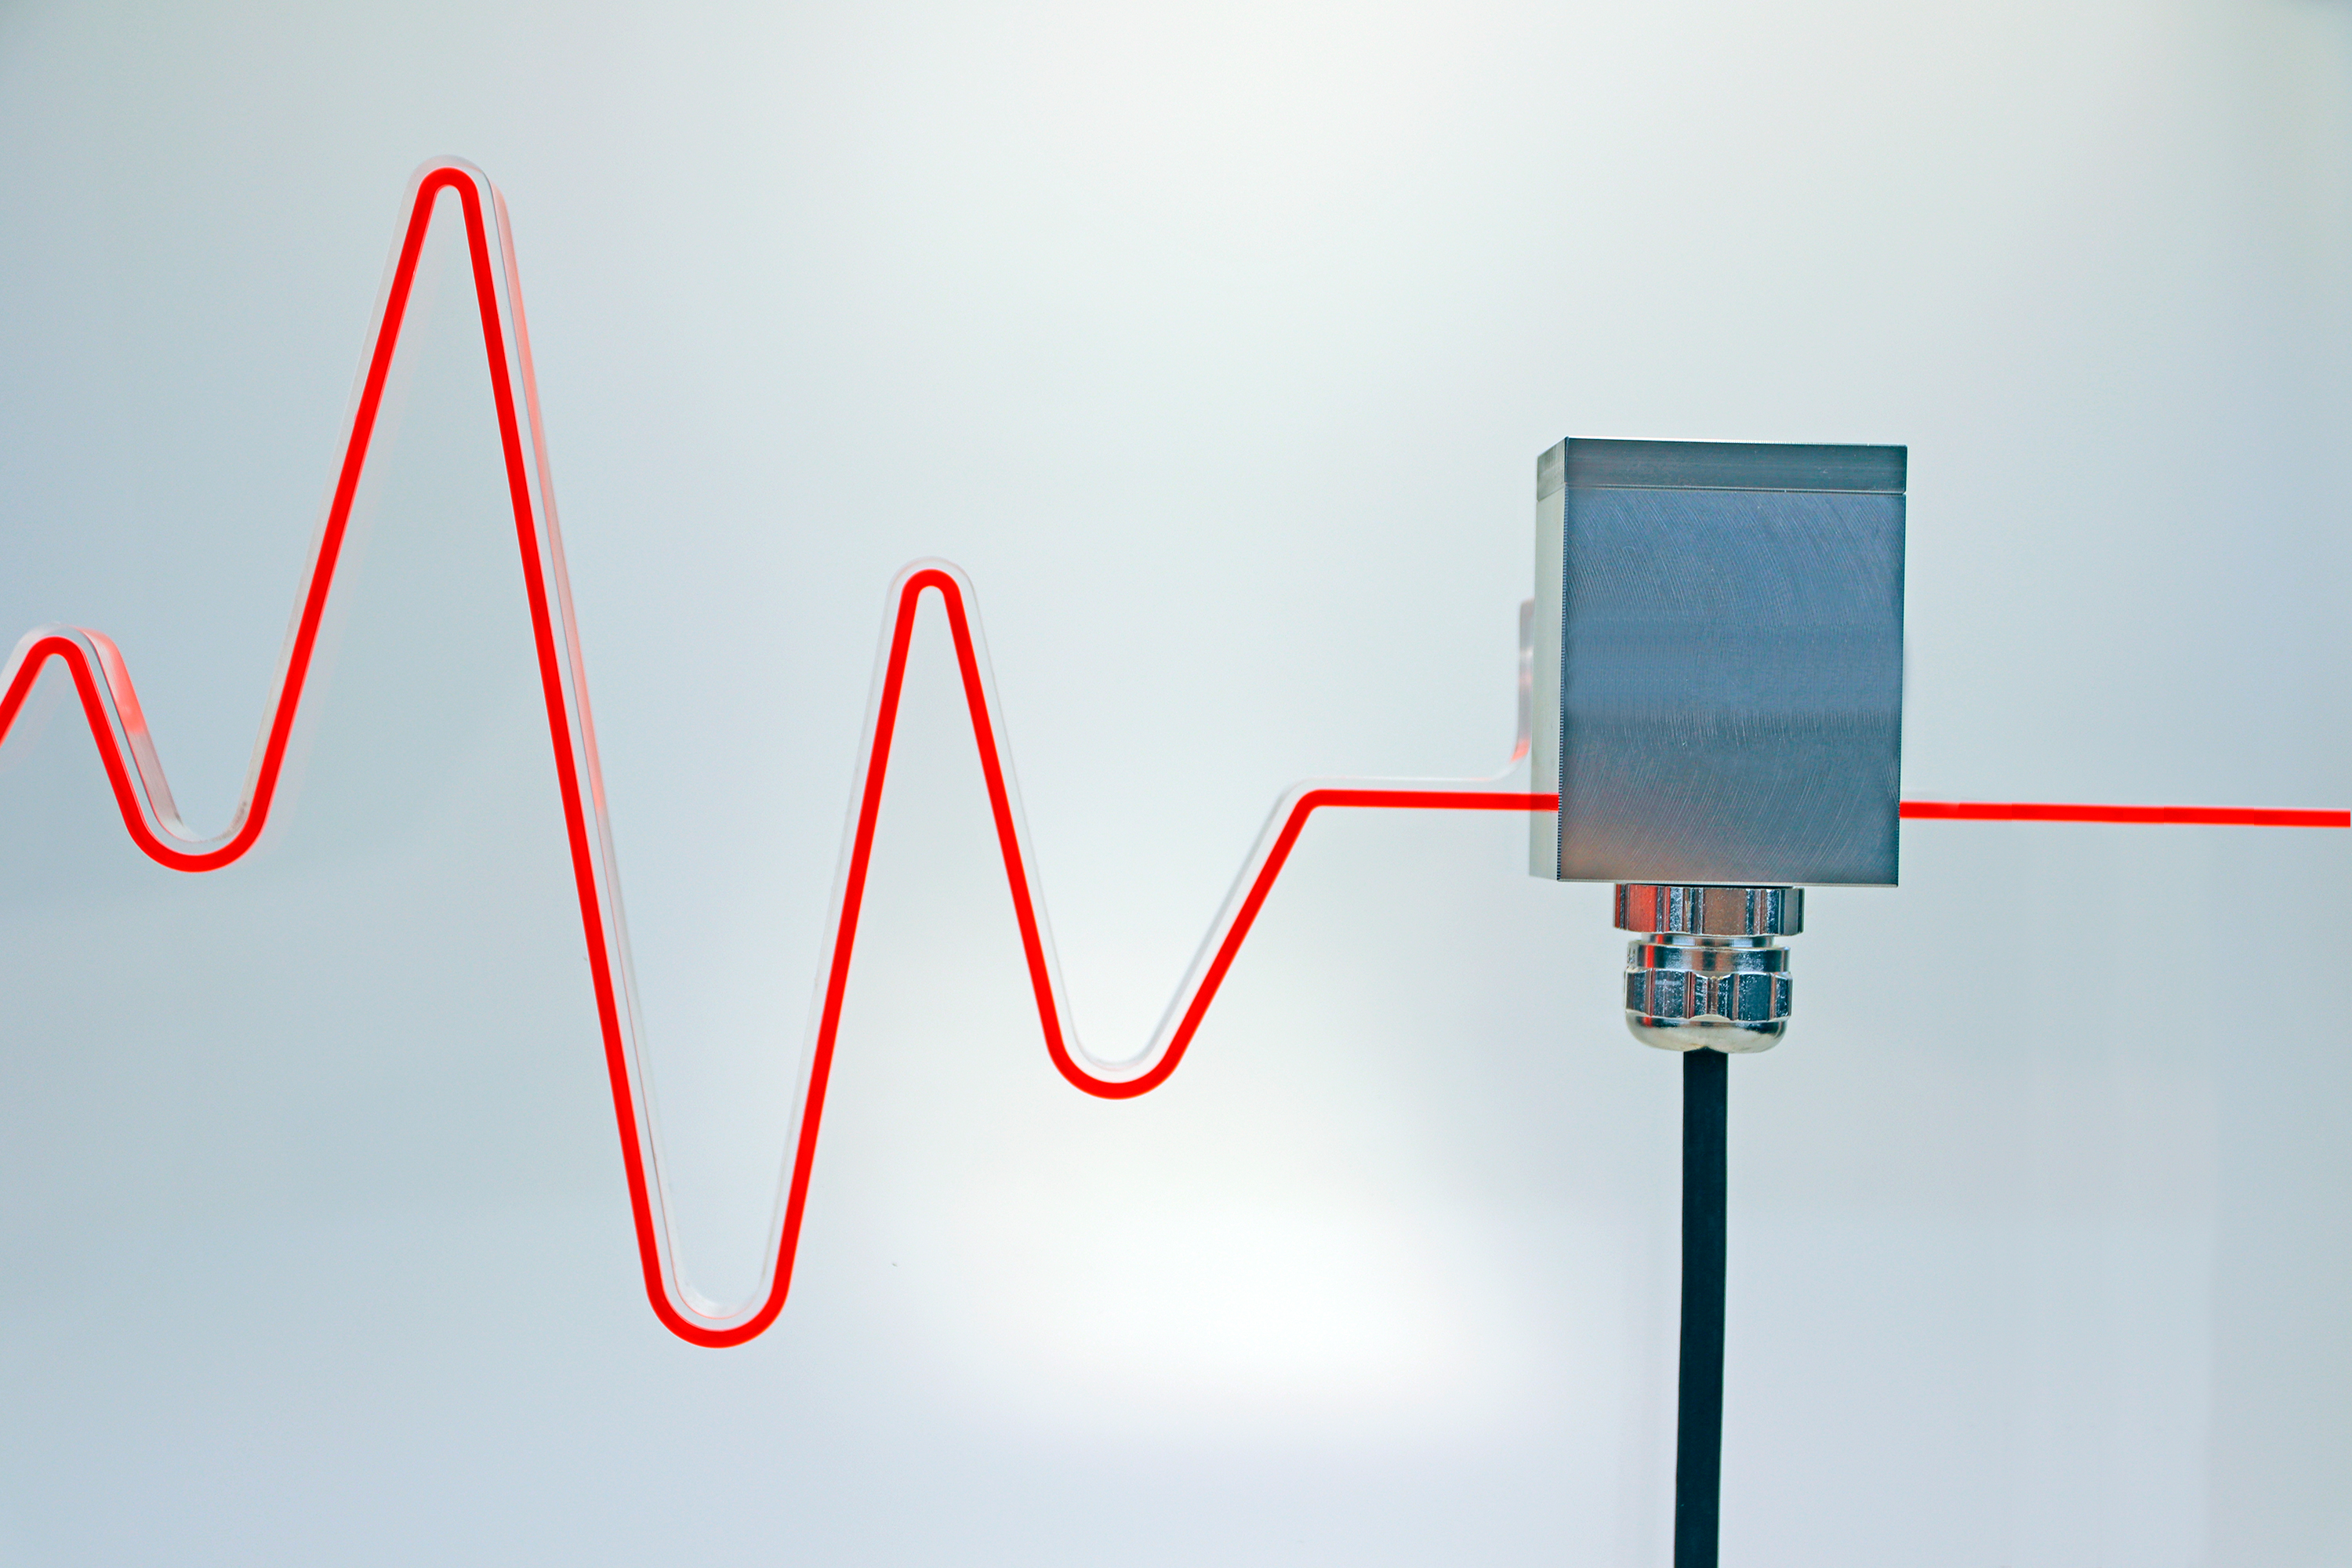 The picture shows an acceleration sensor in flange design - a red sinusoidal curve shape can be seen in the background, symbolising an acceleration force.